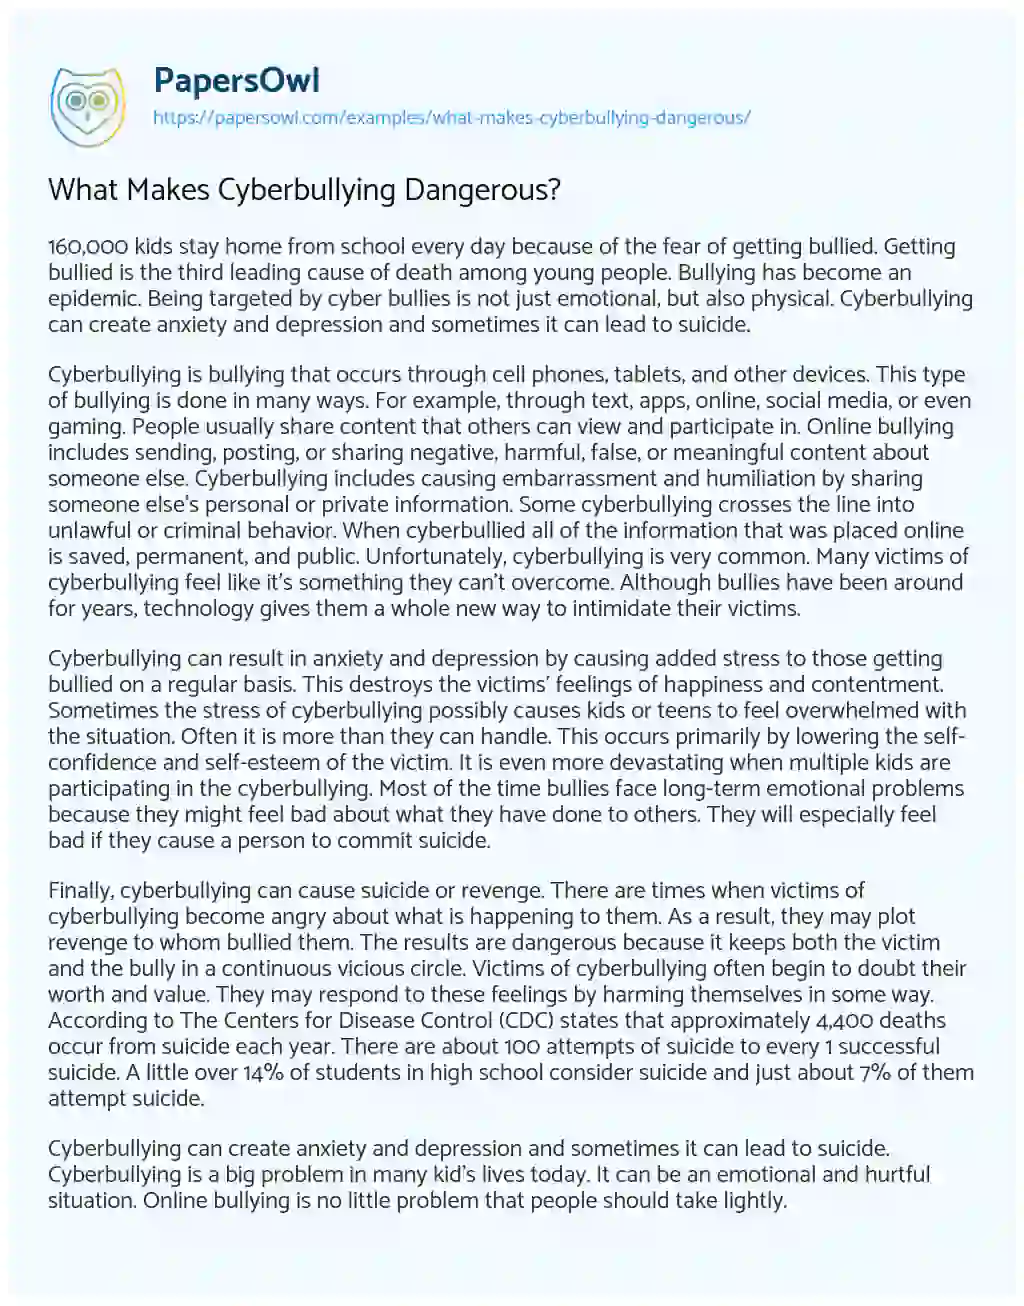 Essay on What Makes Cyberbullying Dangerous?